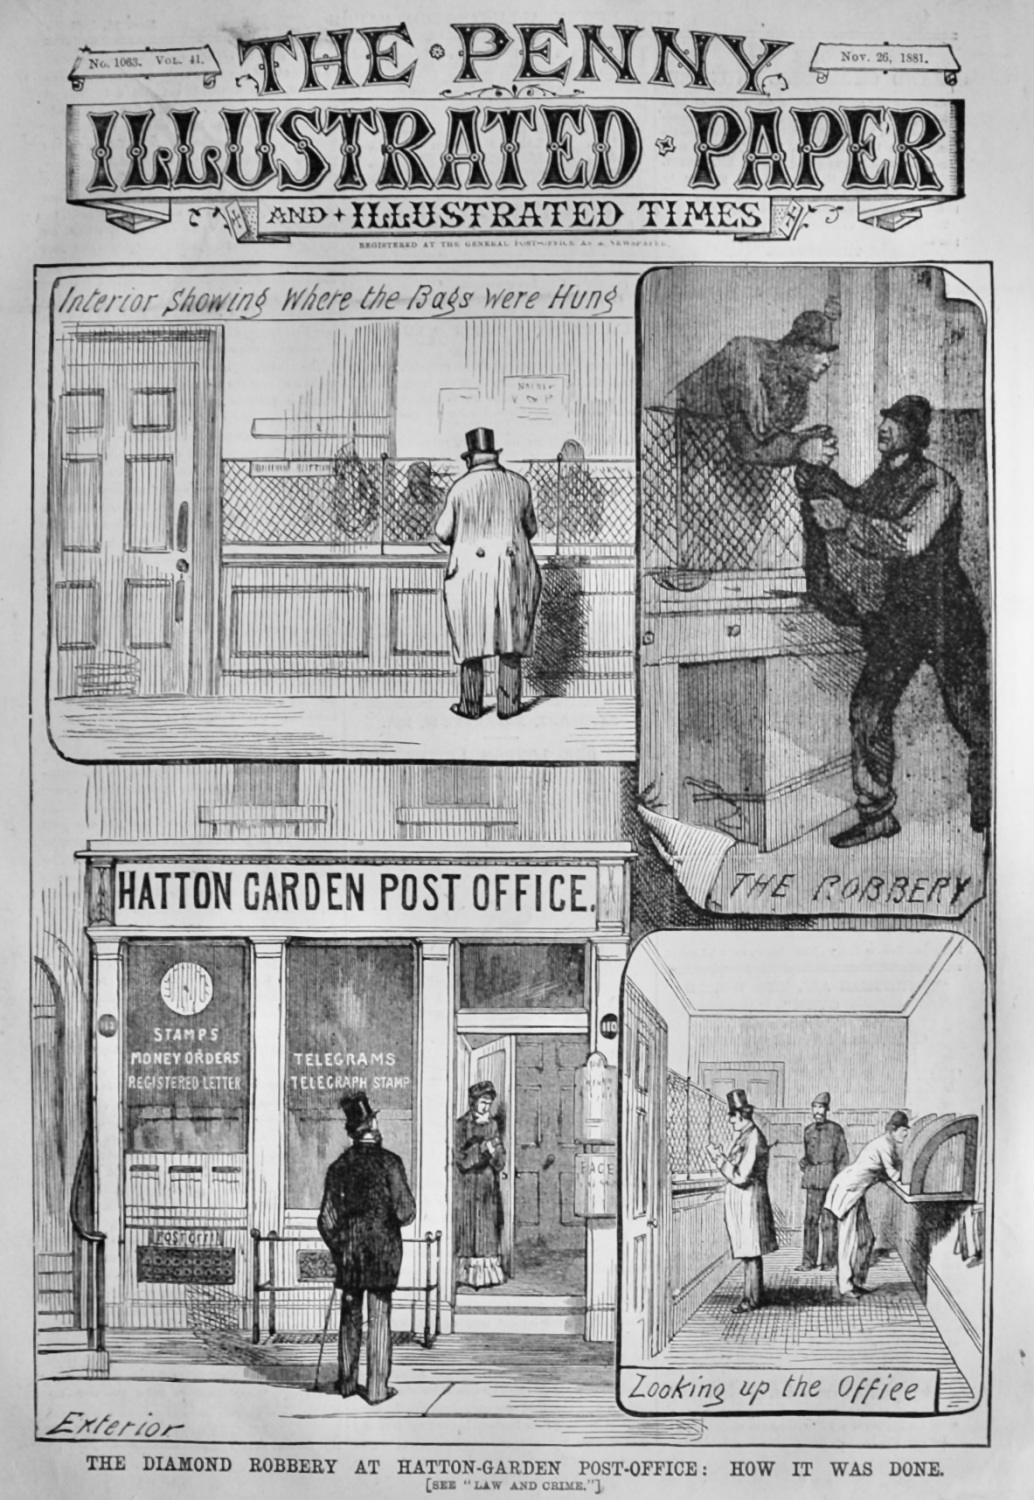 The Diamond Robbery at Hatton-Garden Post-Office :  How it was Done.  1881.